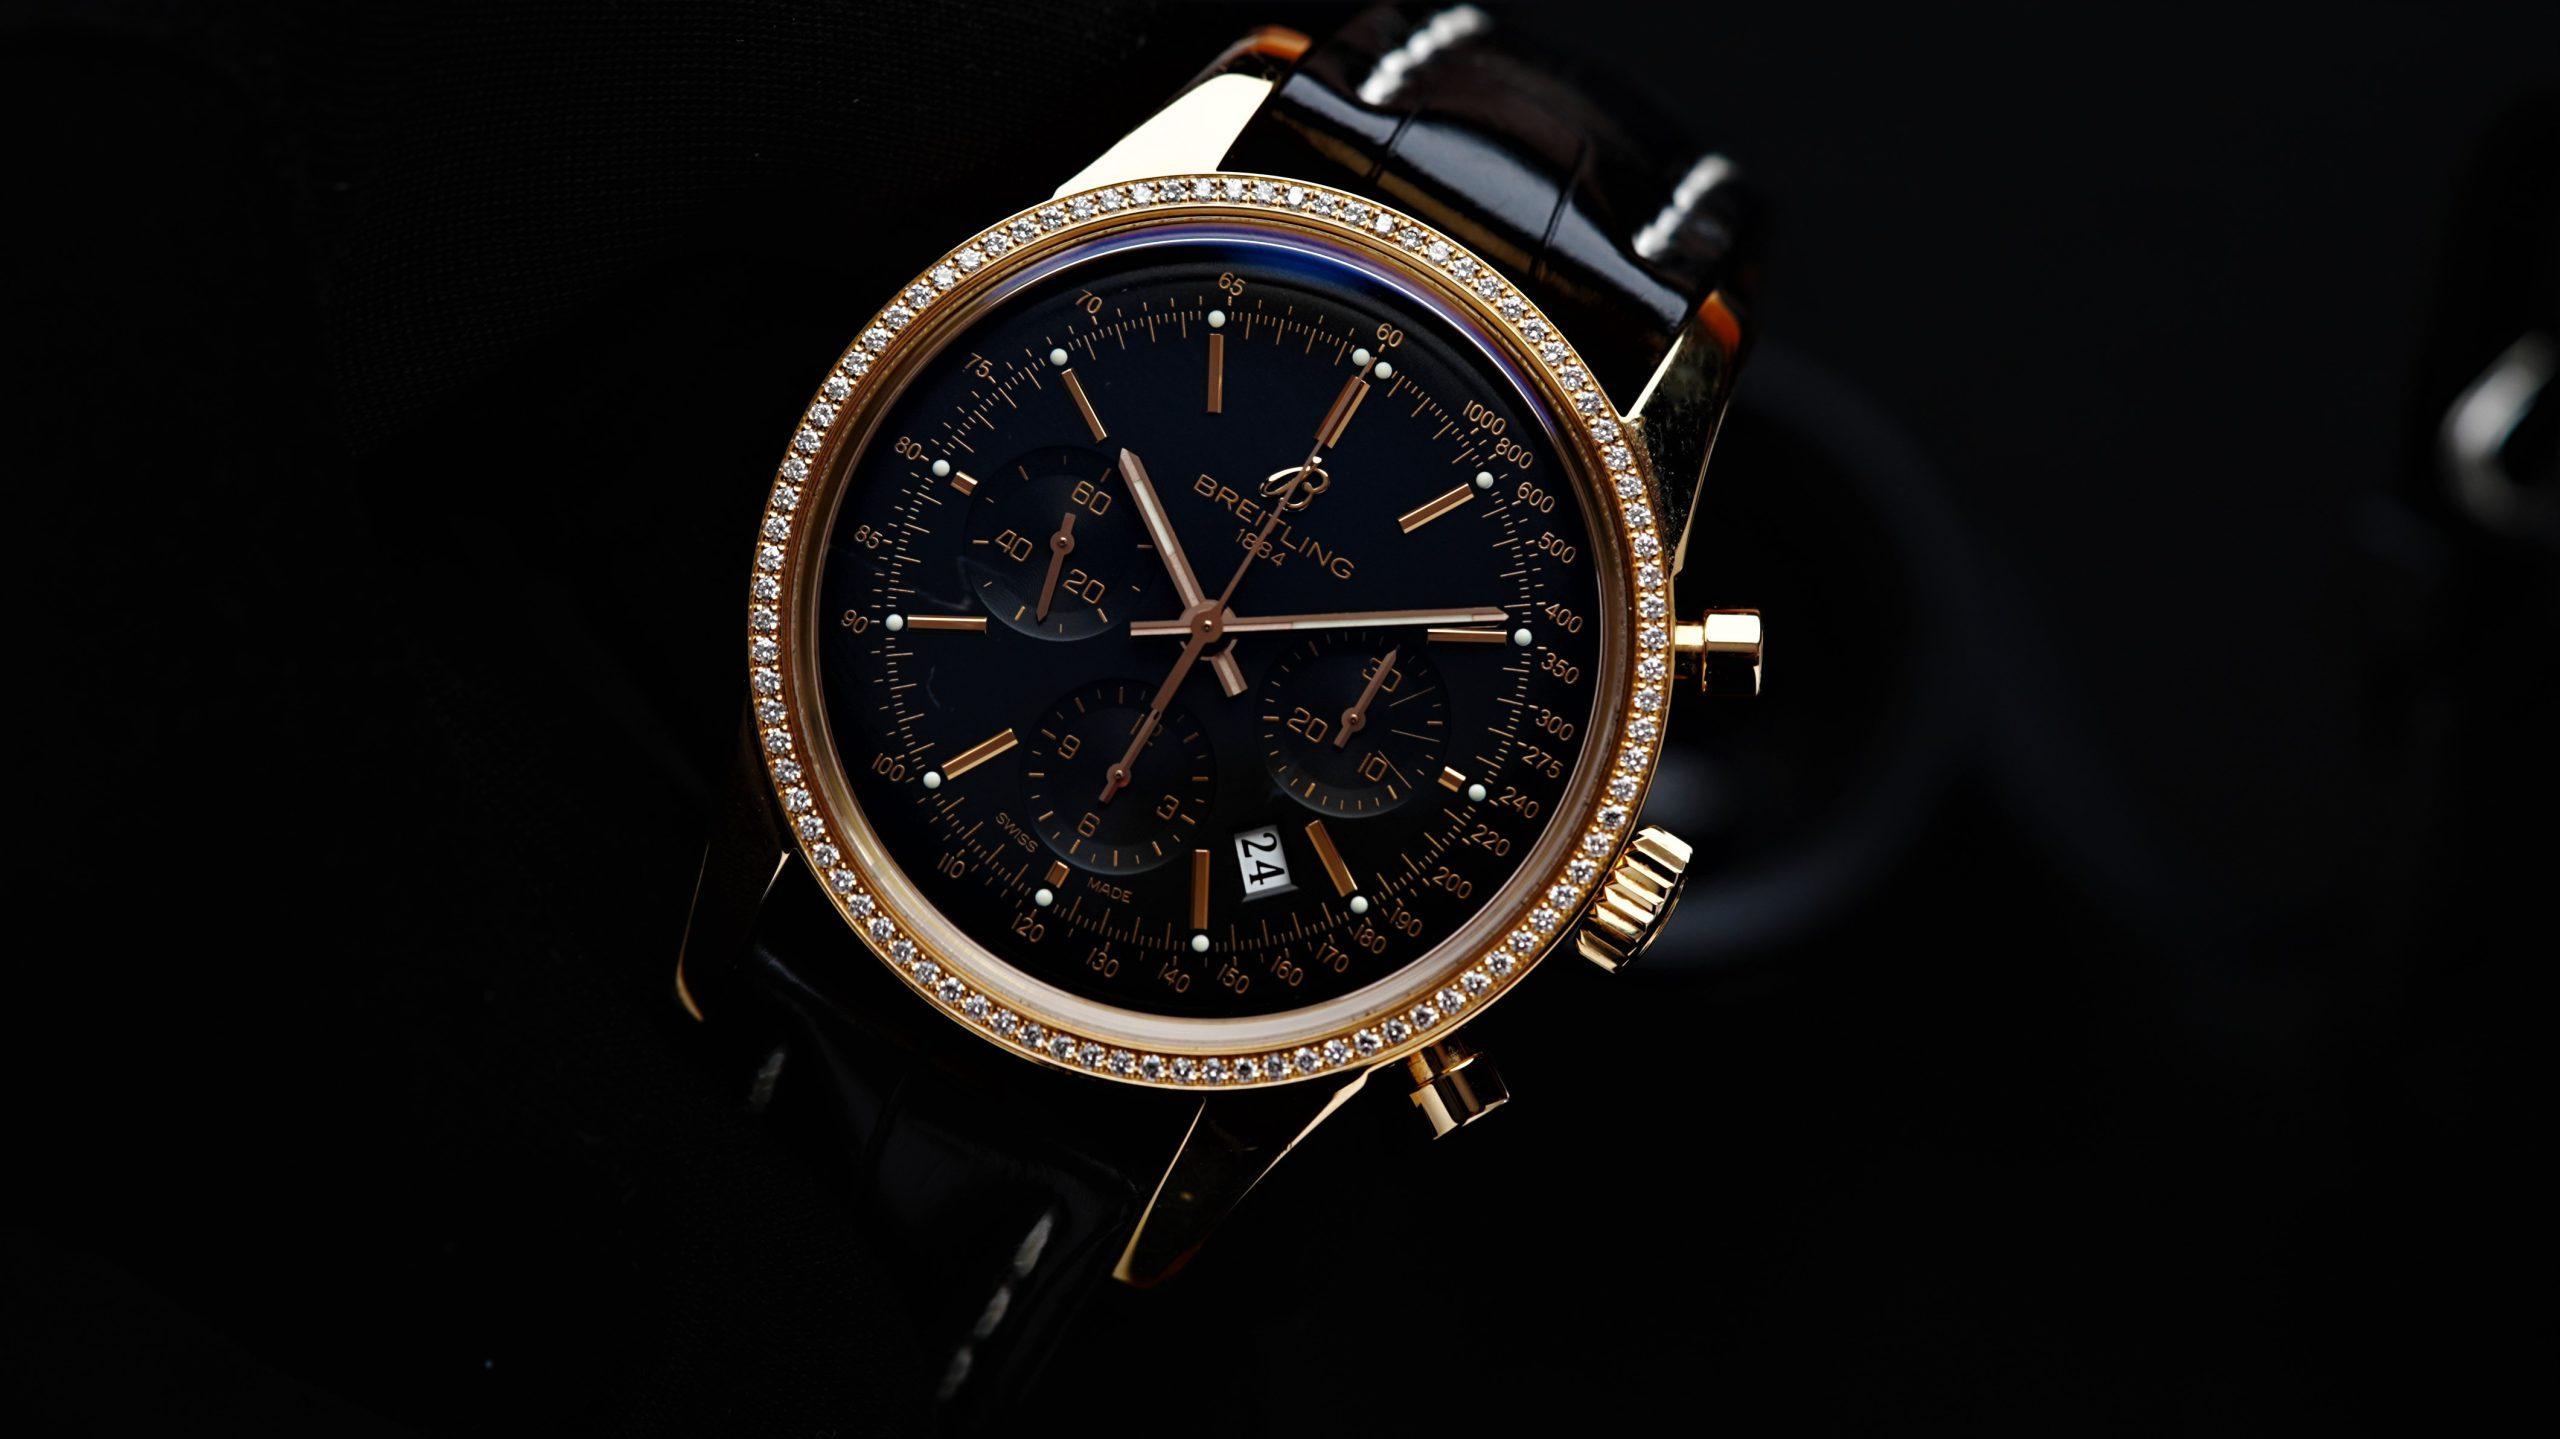 Angle shot of the Breitling Transocean Chronograph Diamonds Rose Gold watch.